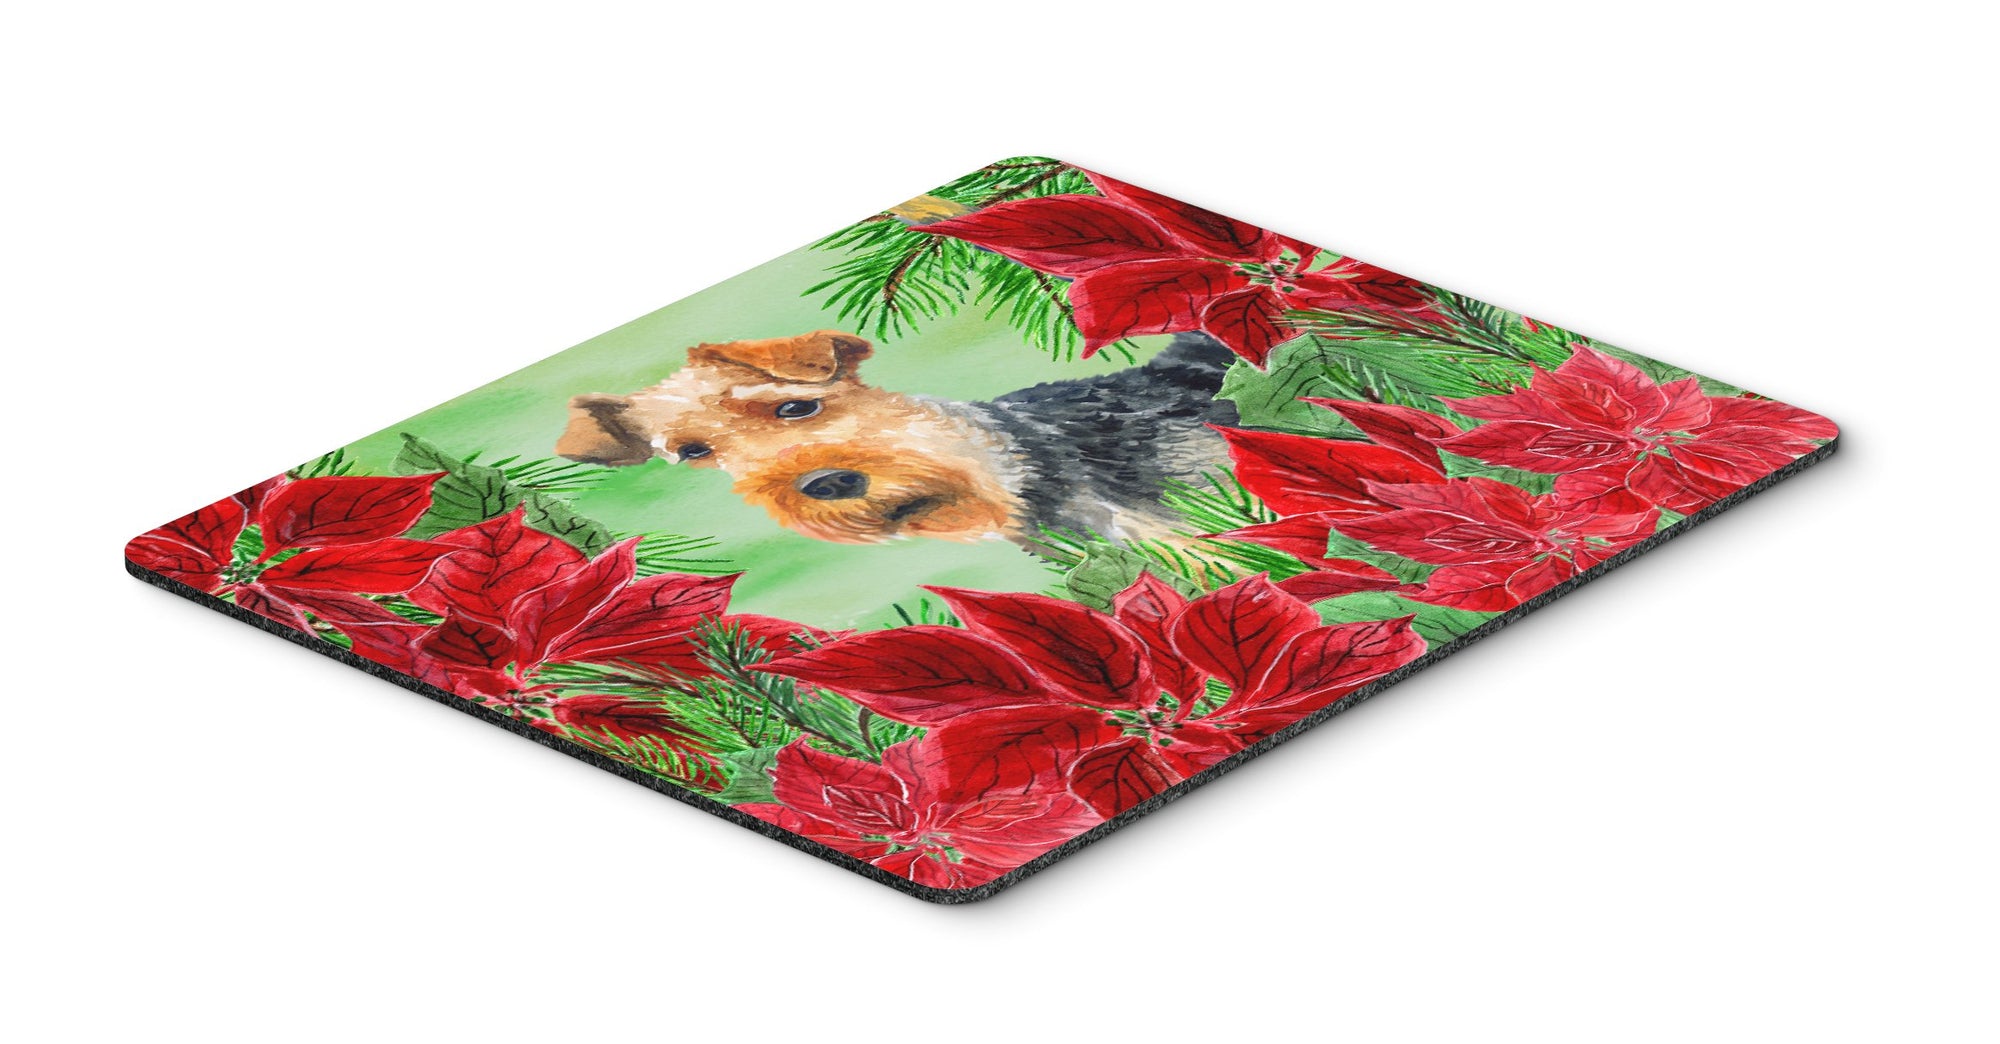 Welsh Terrier Poinsettas Mouse Pad, Hot Pad or Trivet CK1348MP by Caroline's Treasures